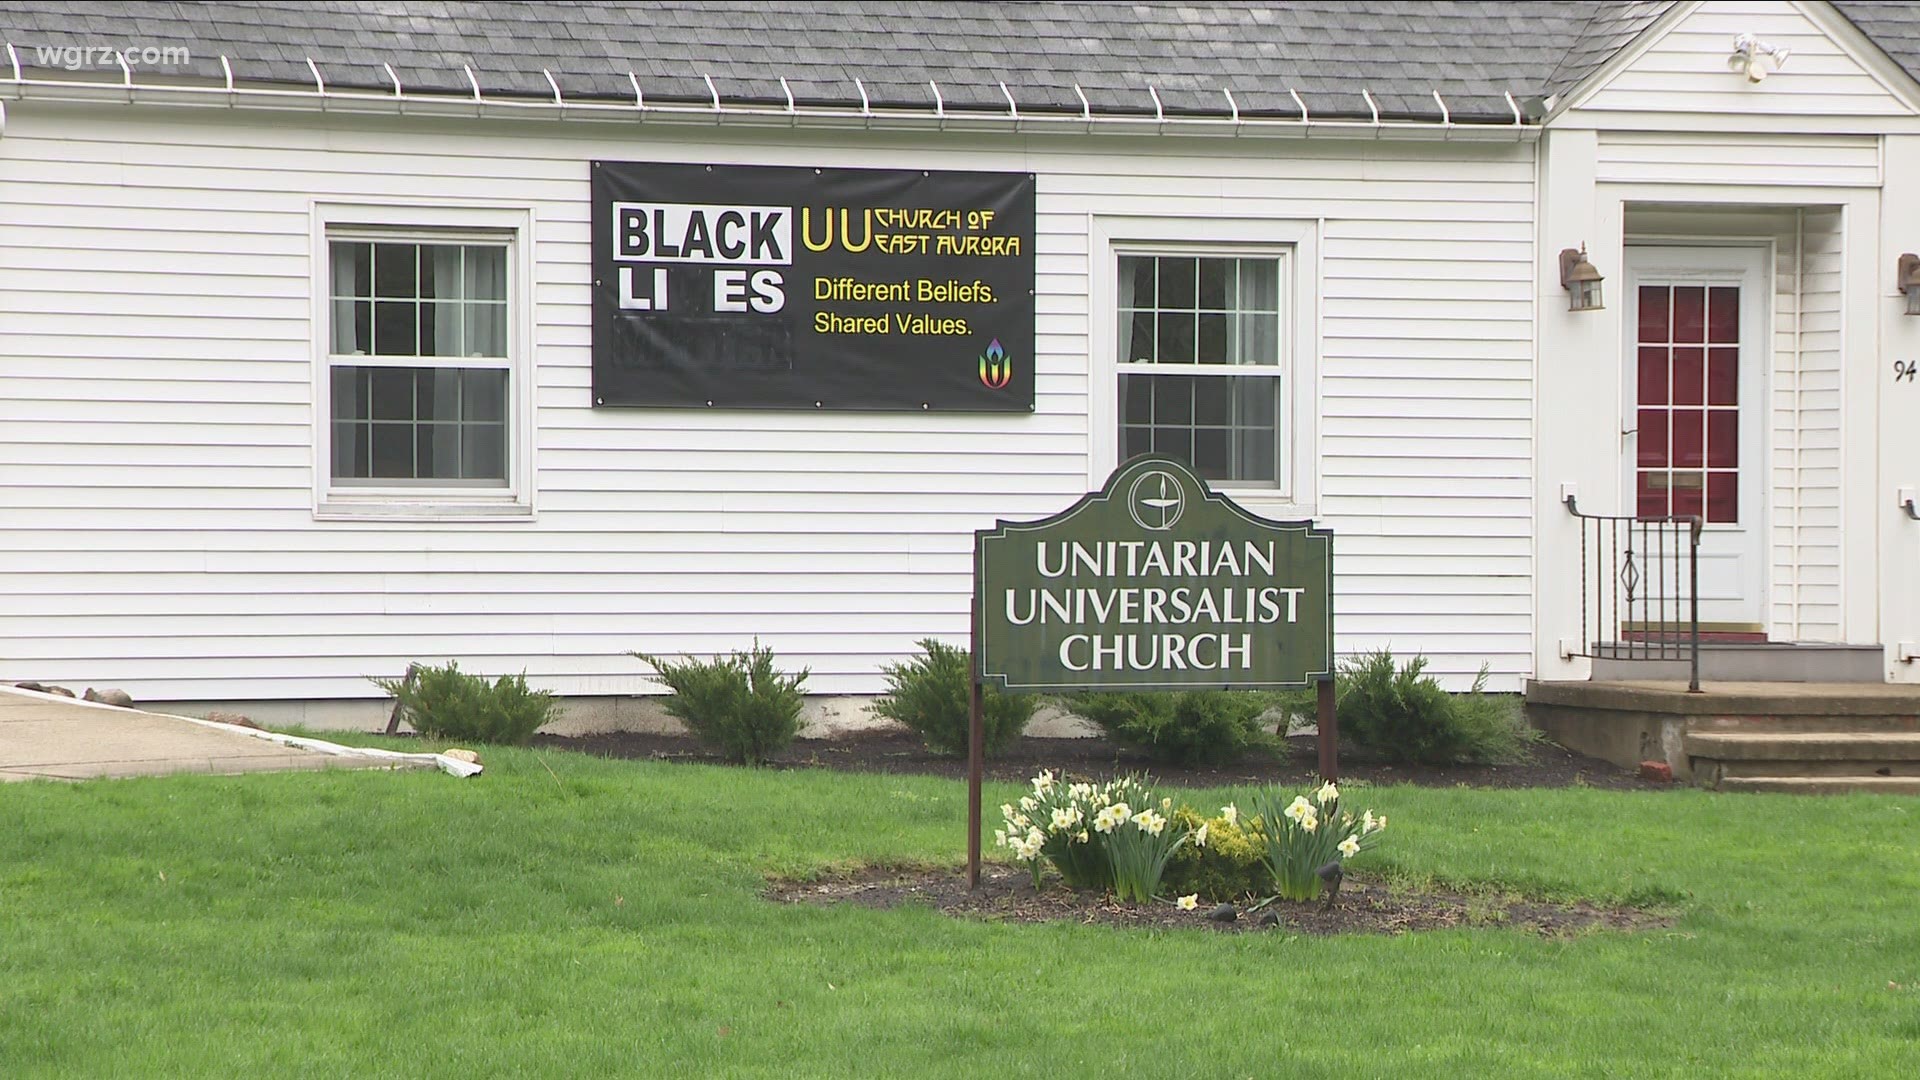 Police in the south towns are looking for some help on a defacing of a black lives matter banner on the outer wall of a local church in East Aurora.